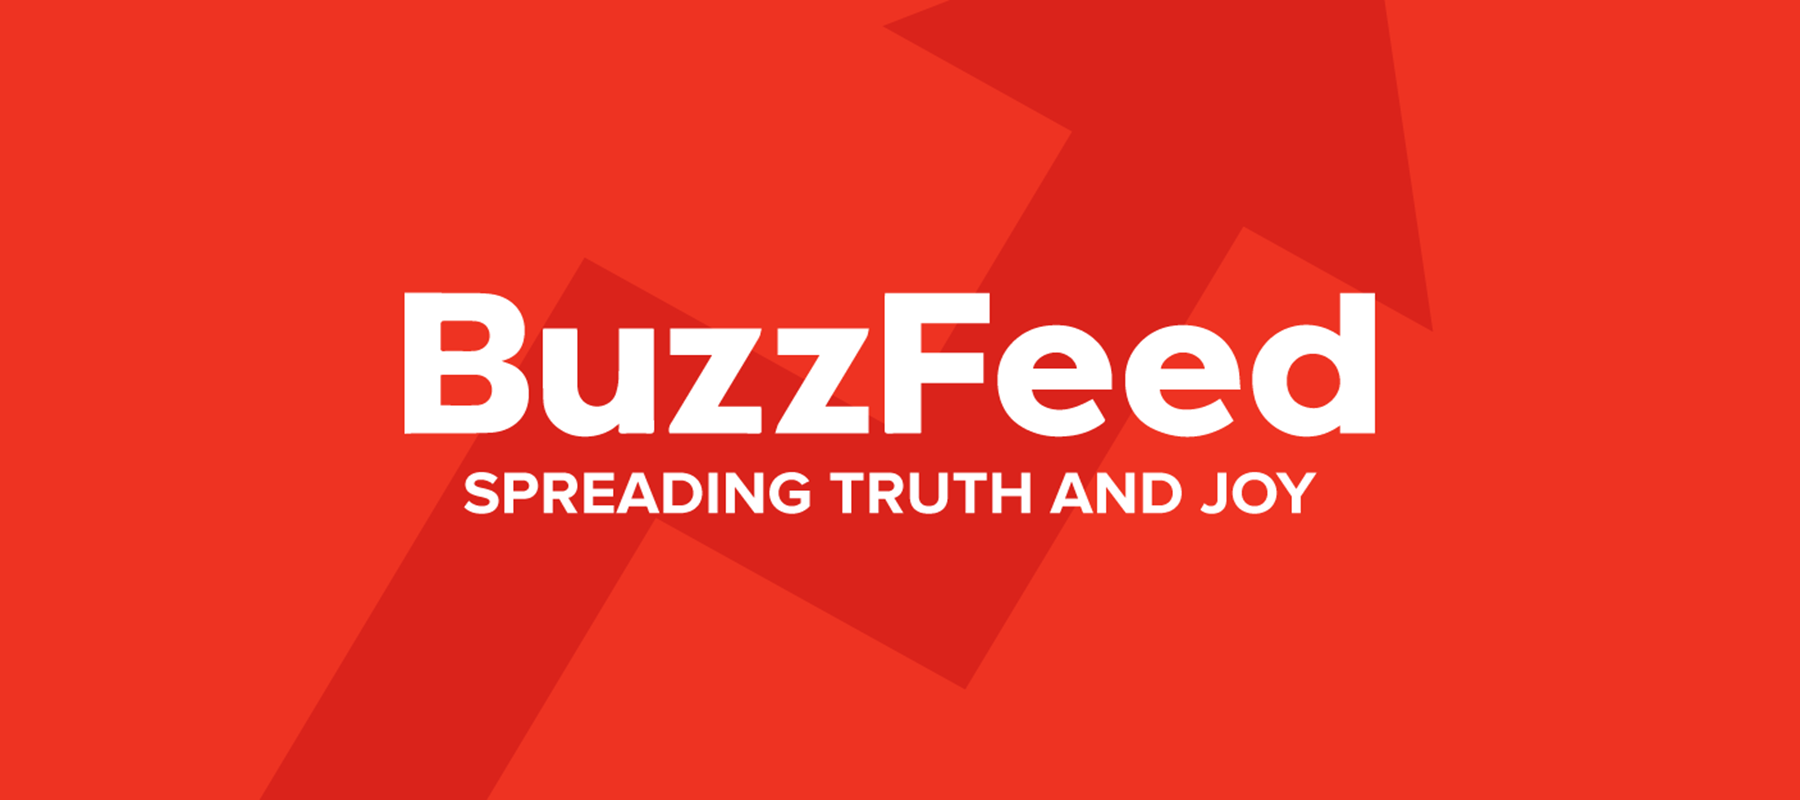 BuzzFeed Studios and Acast launch new podcast